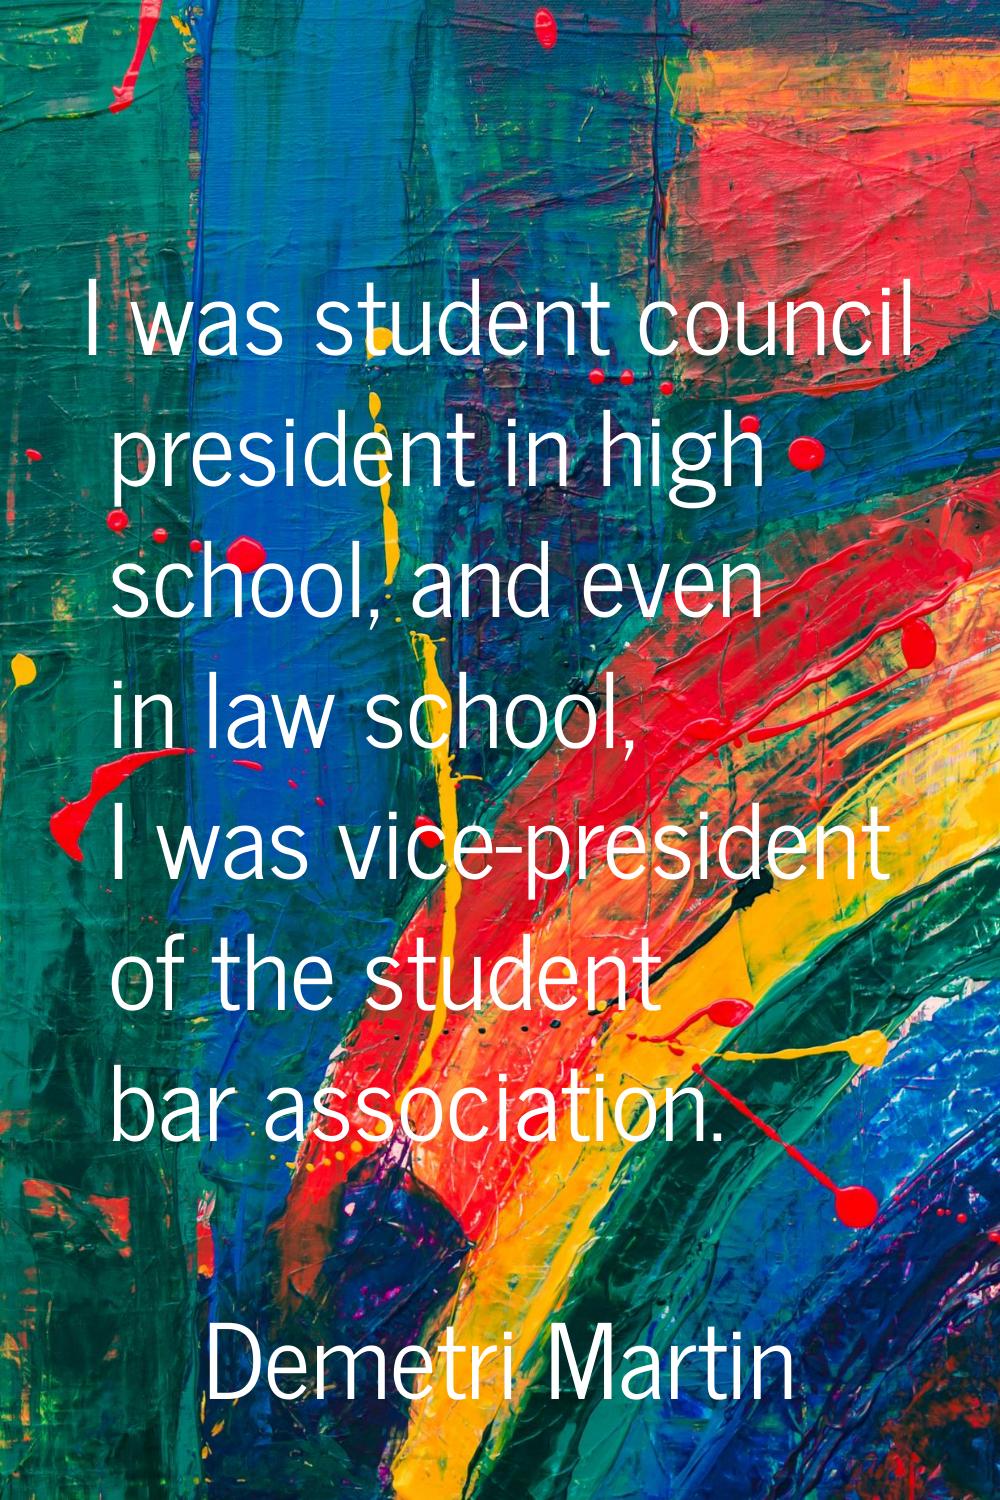 I was student council president in high school, and even in law school, I was vice-president of the